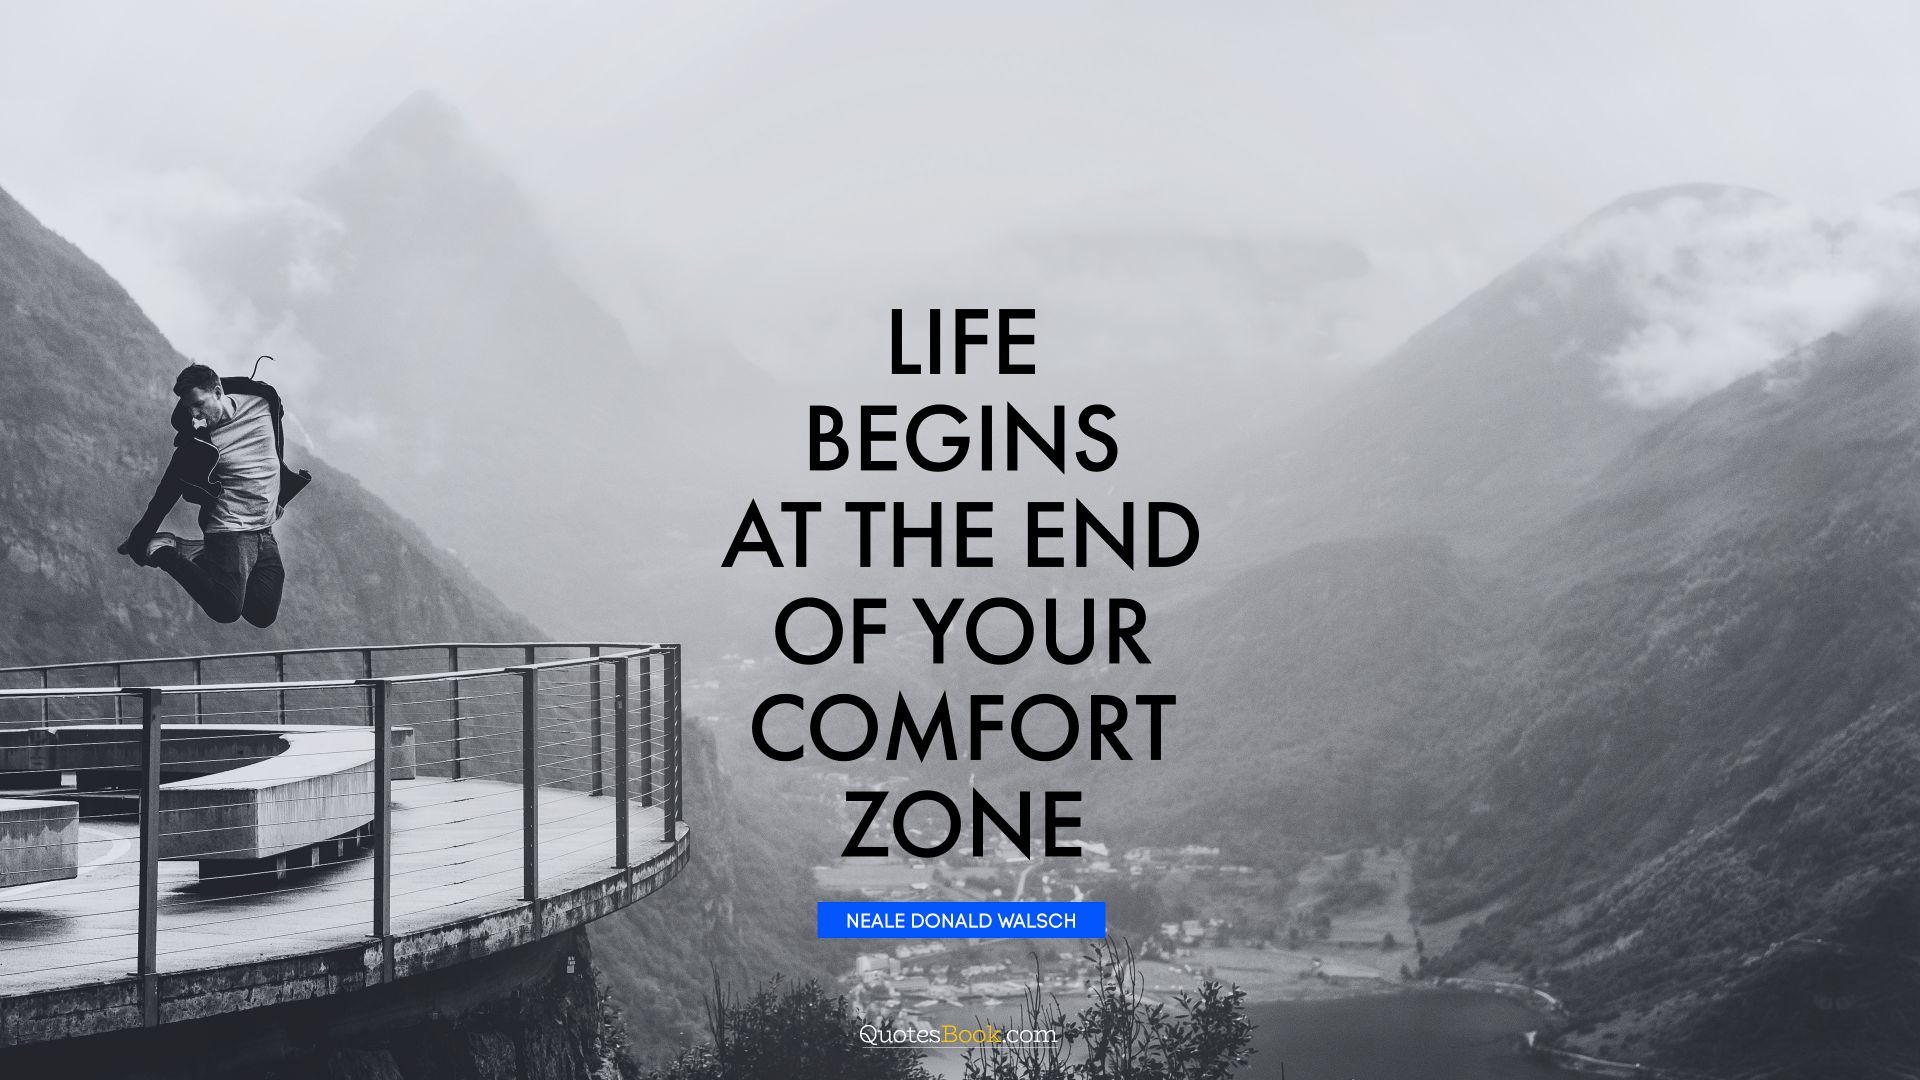 Life begins at the end of your comfort zone. - Quote by Neale Donald Walsch